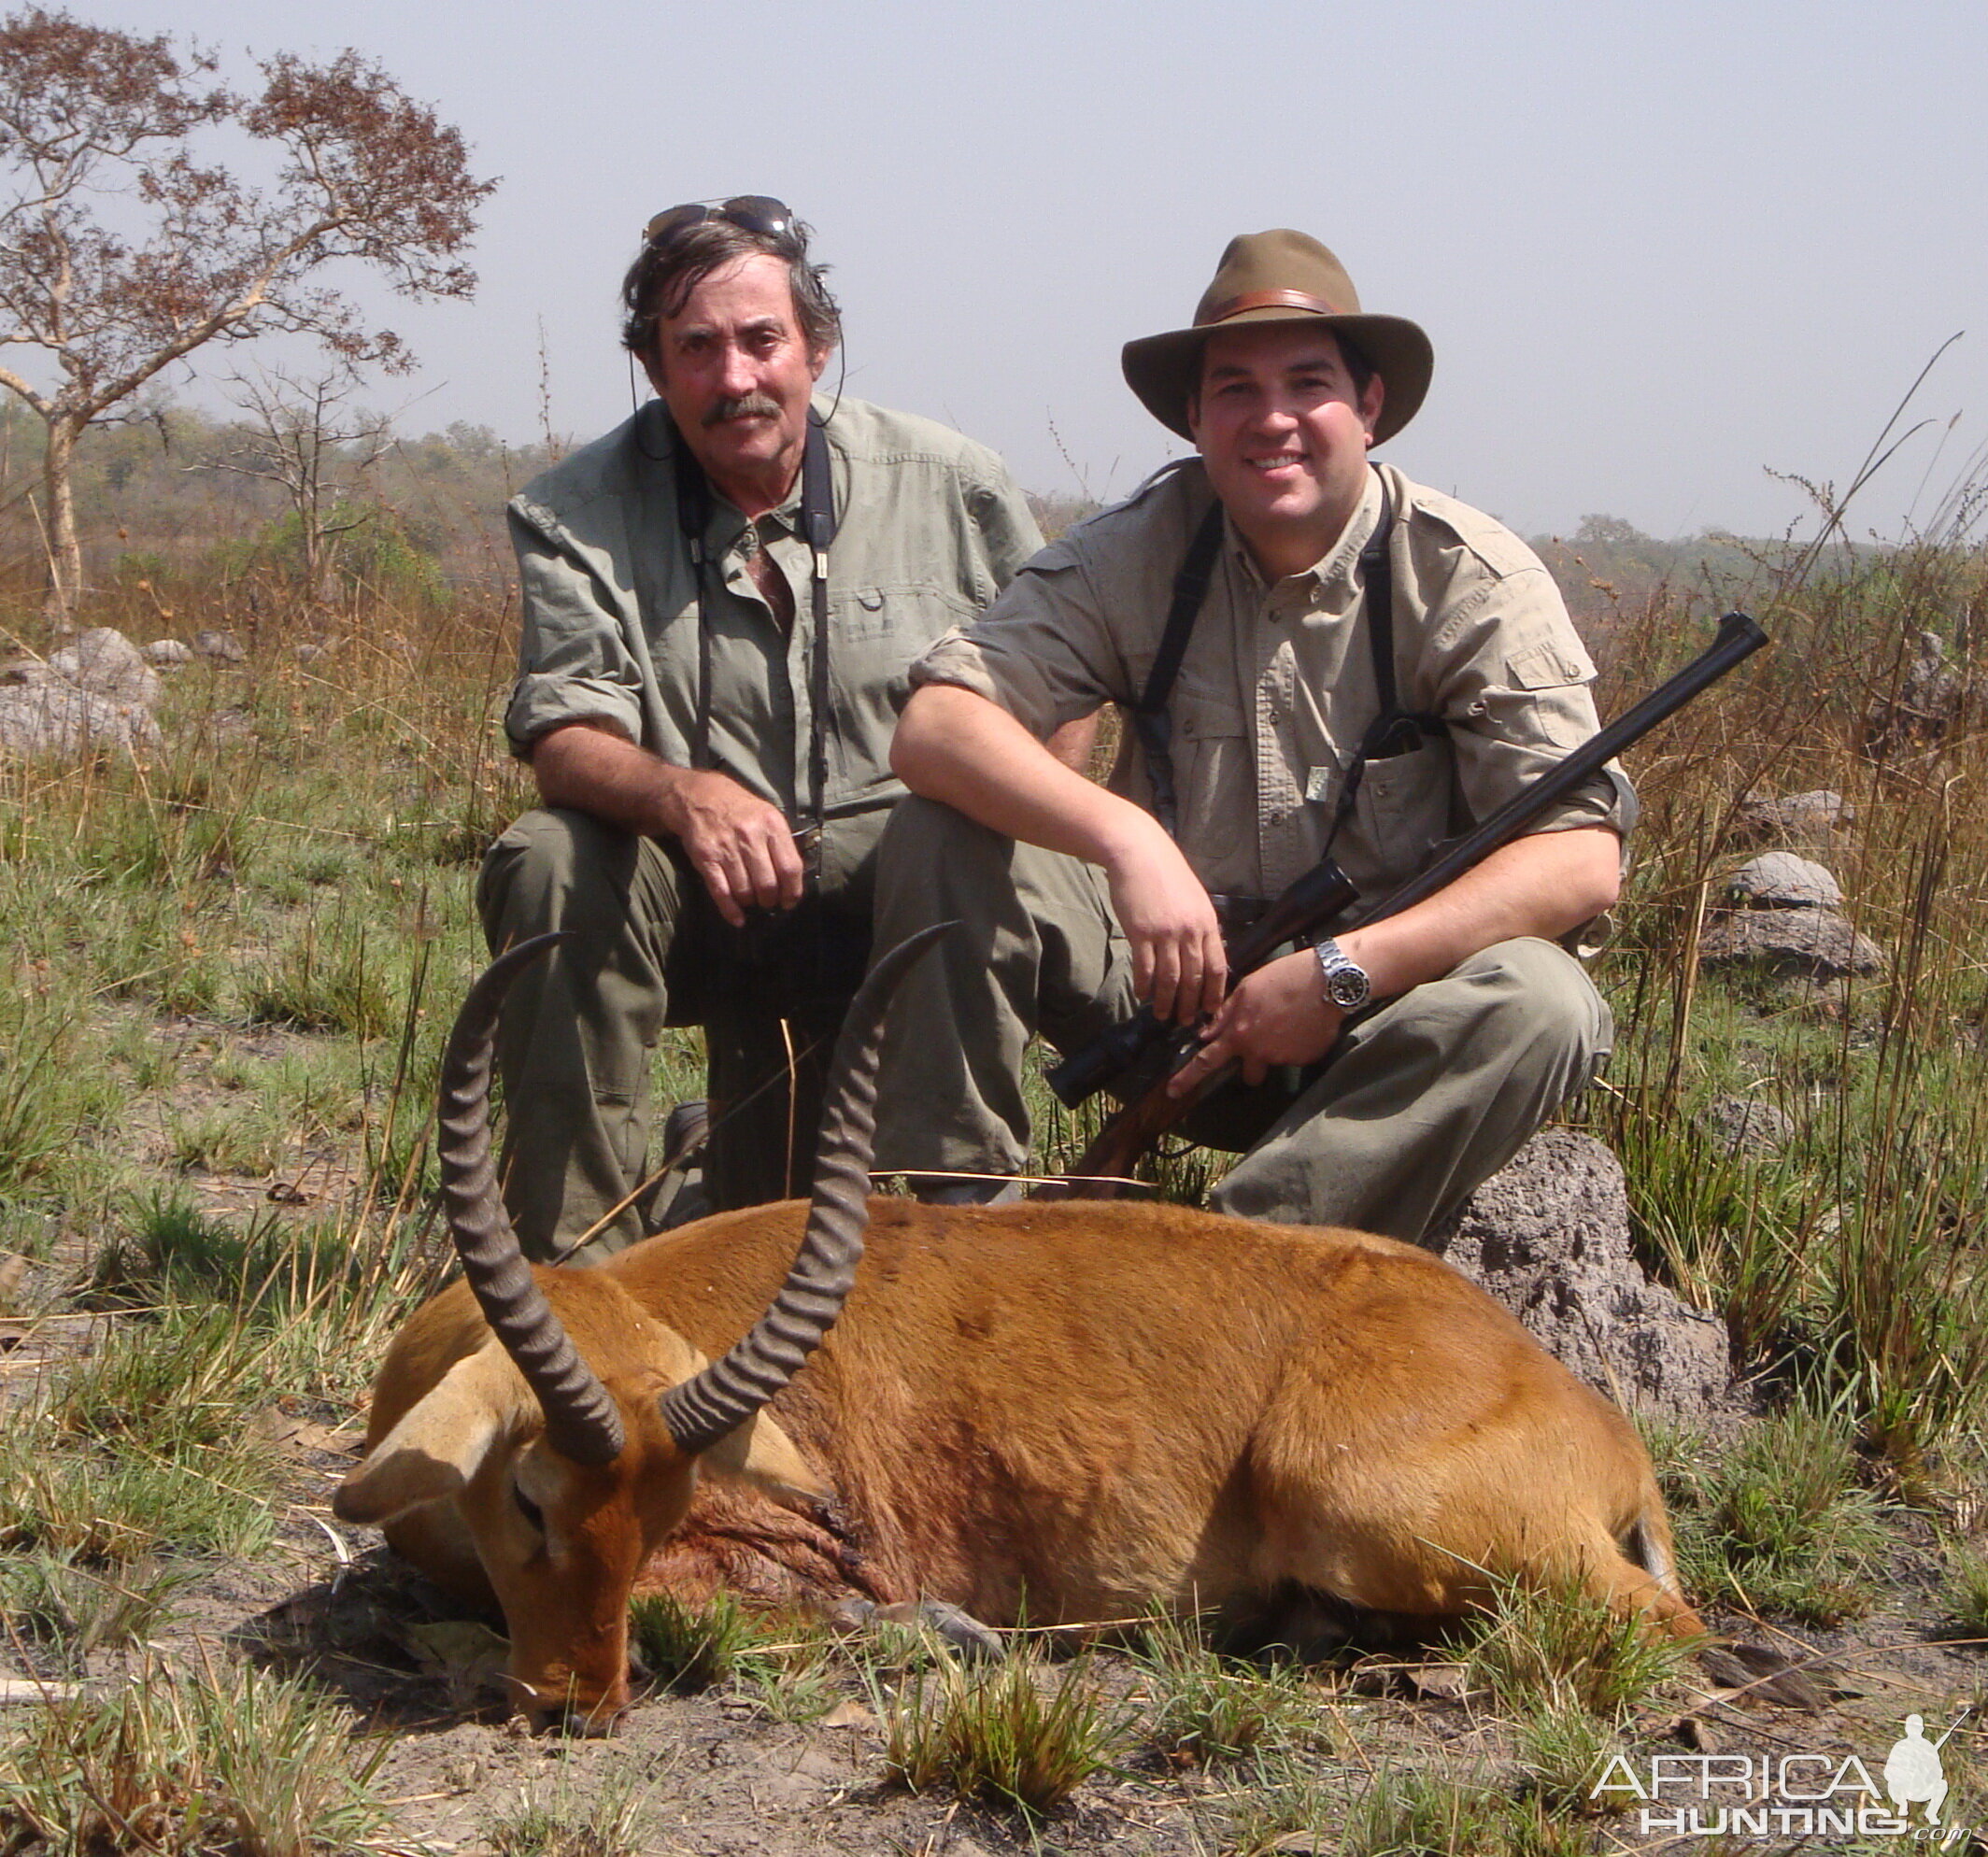 Western Kob/Buffon hunted in Central Africa with Club Faune